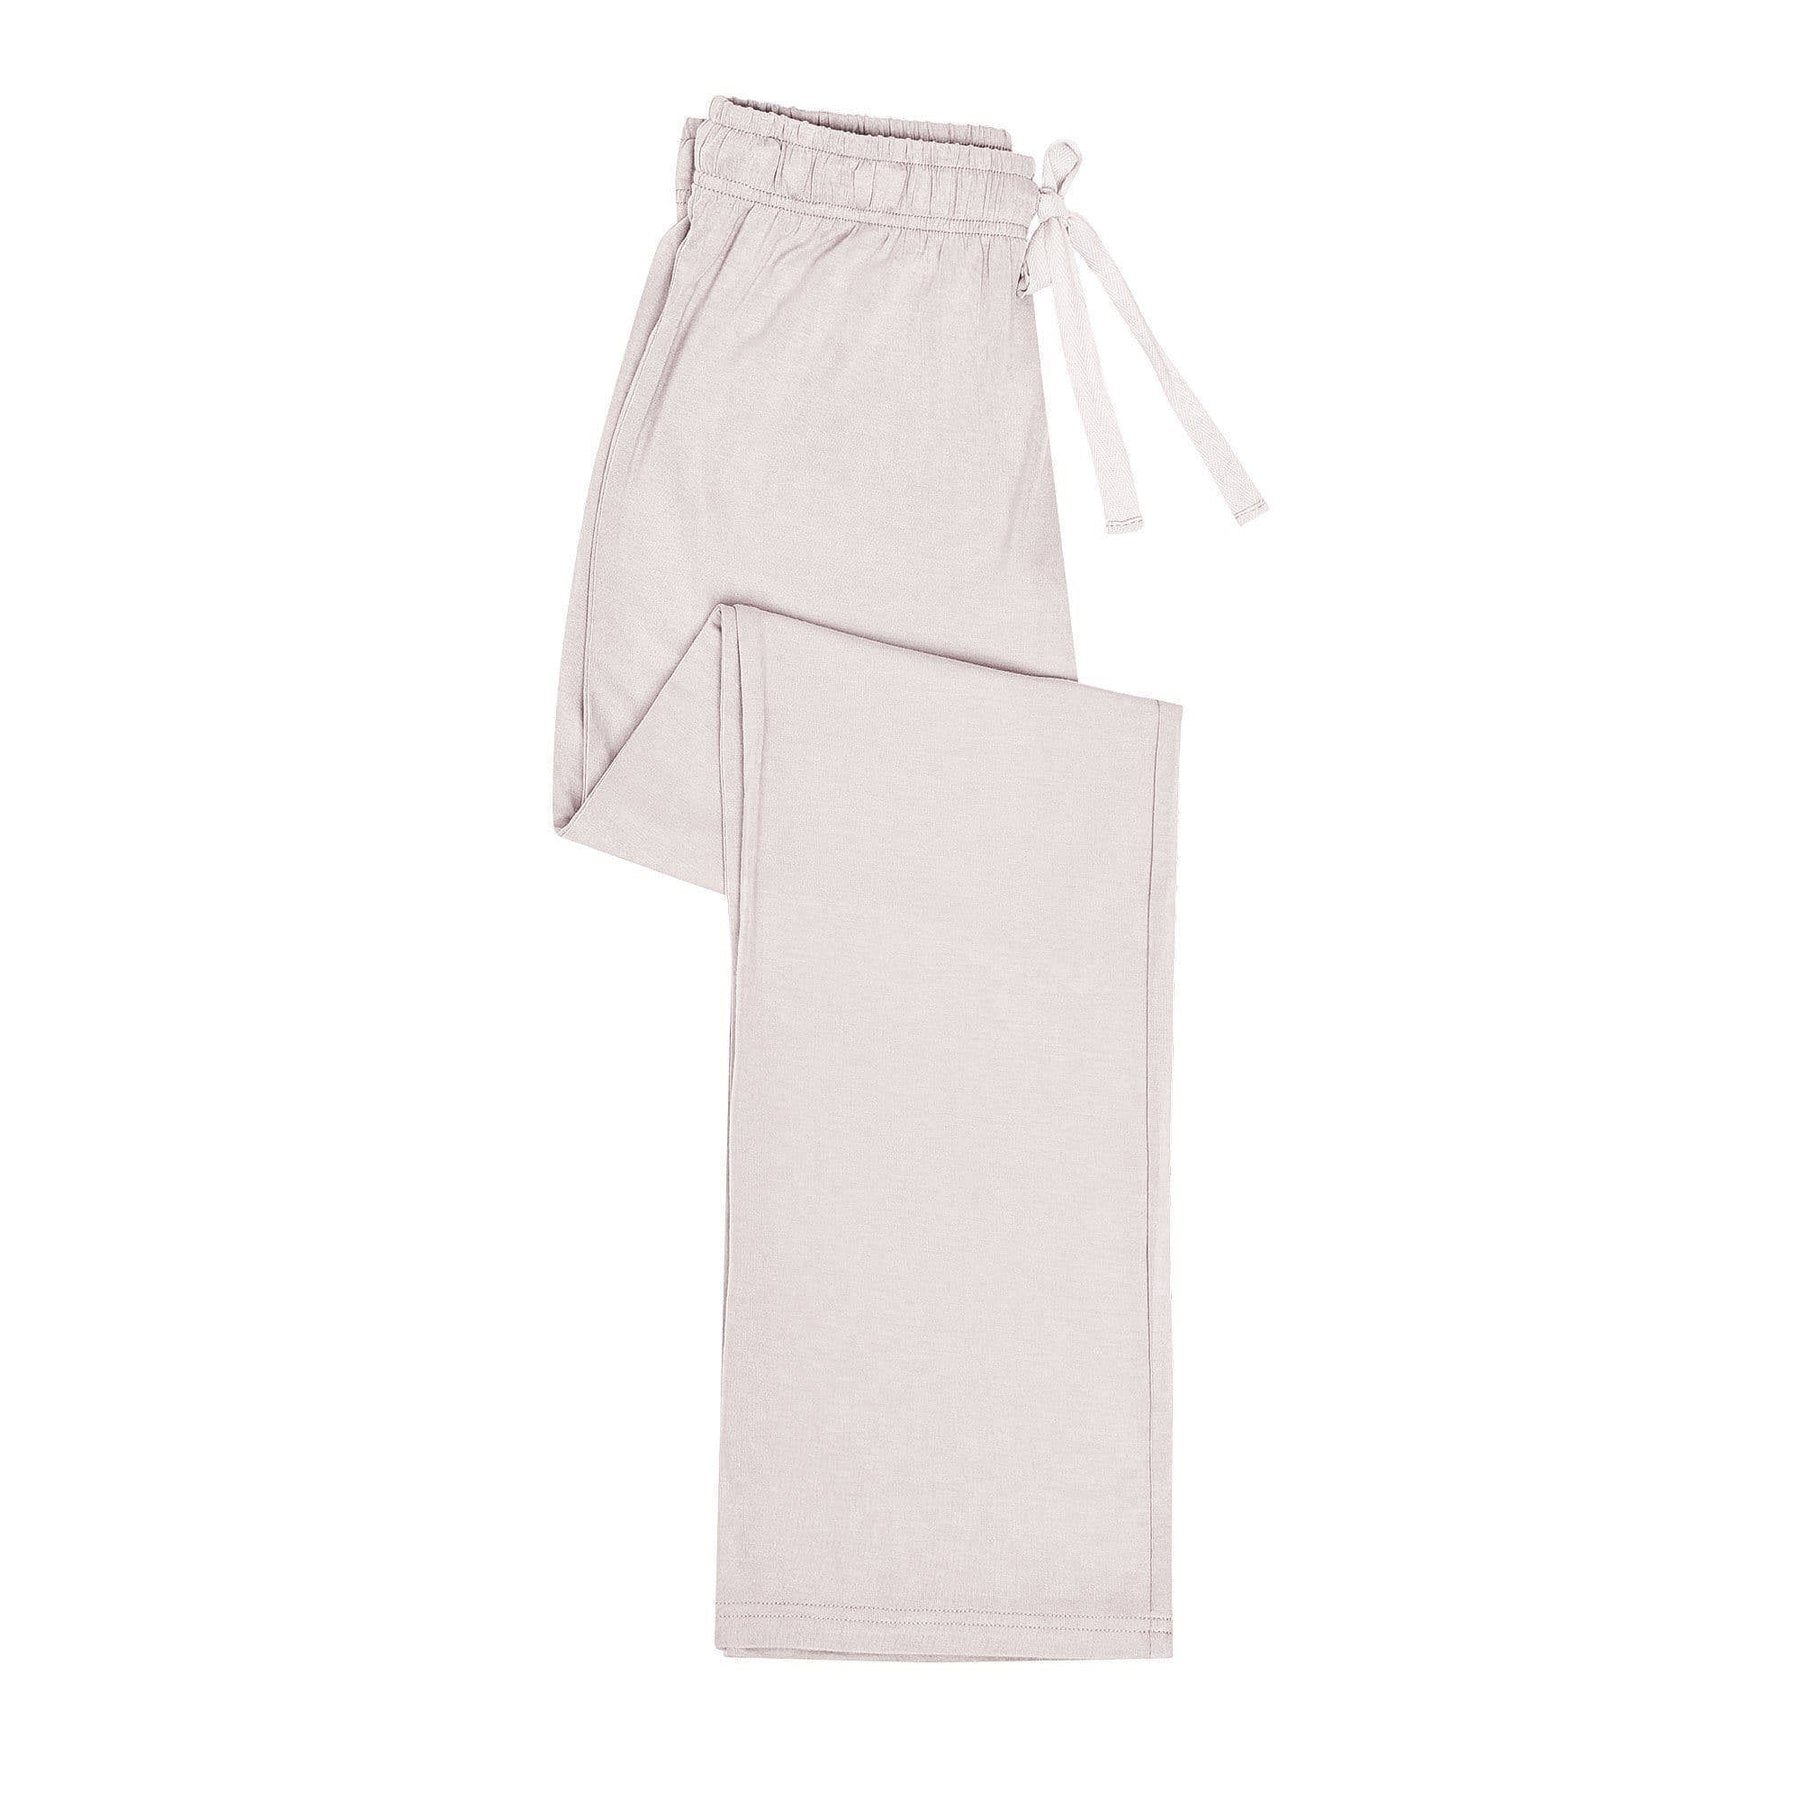 Kyte BABY Lounge Pants with pockets Women's Lounge Pants in Oat